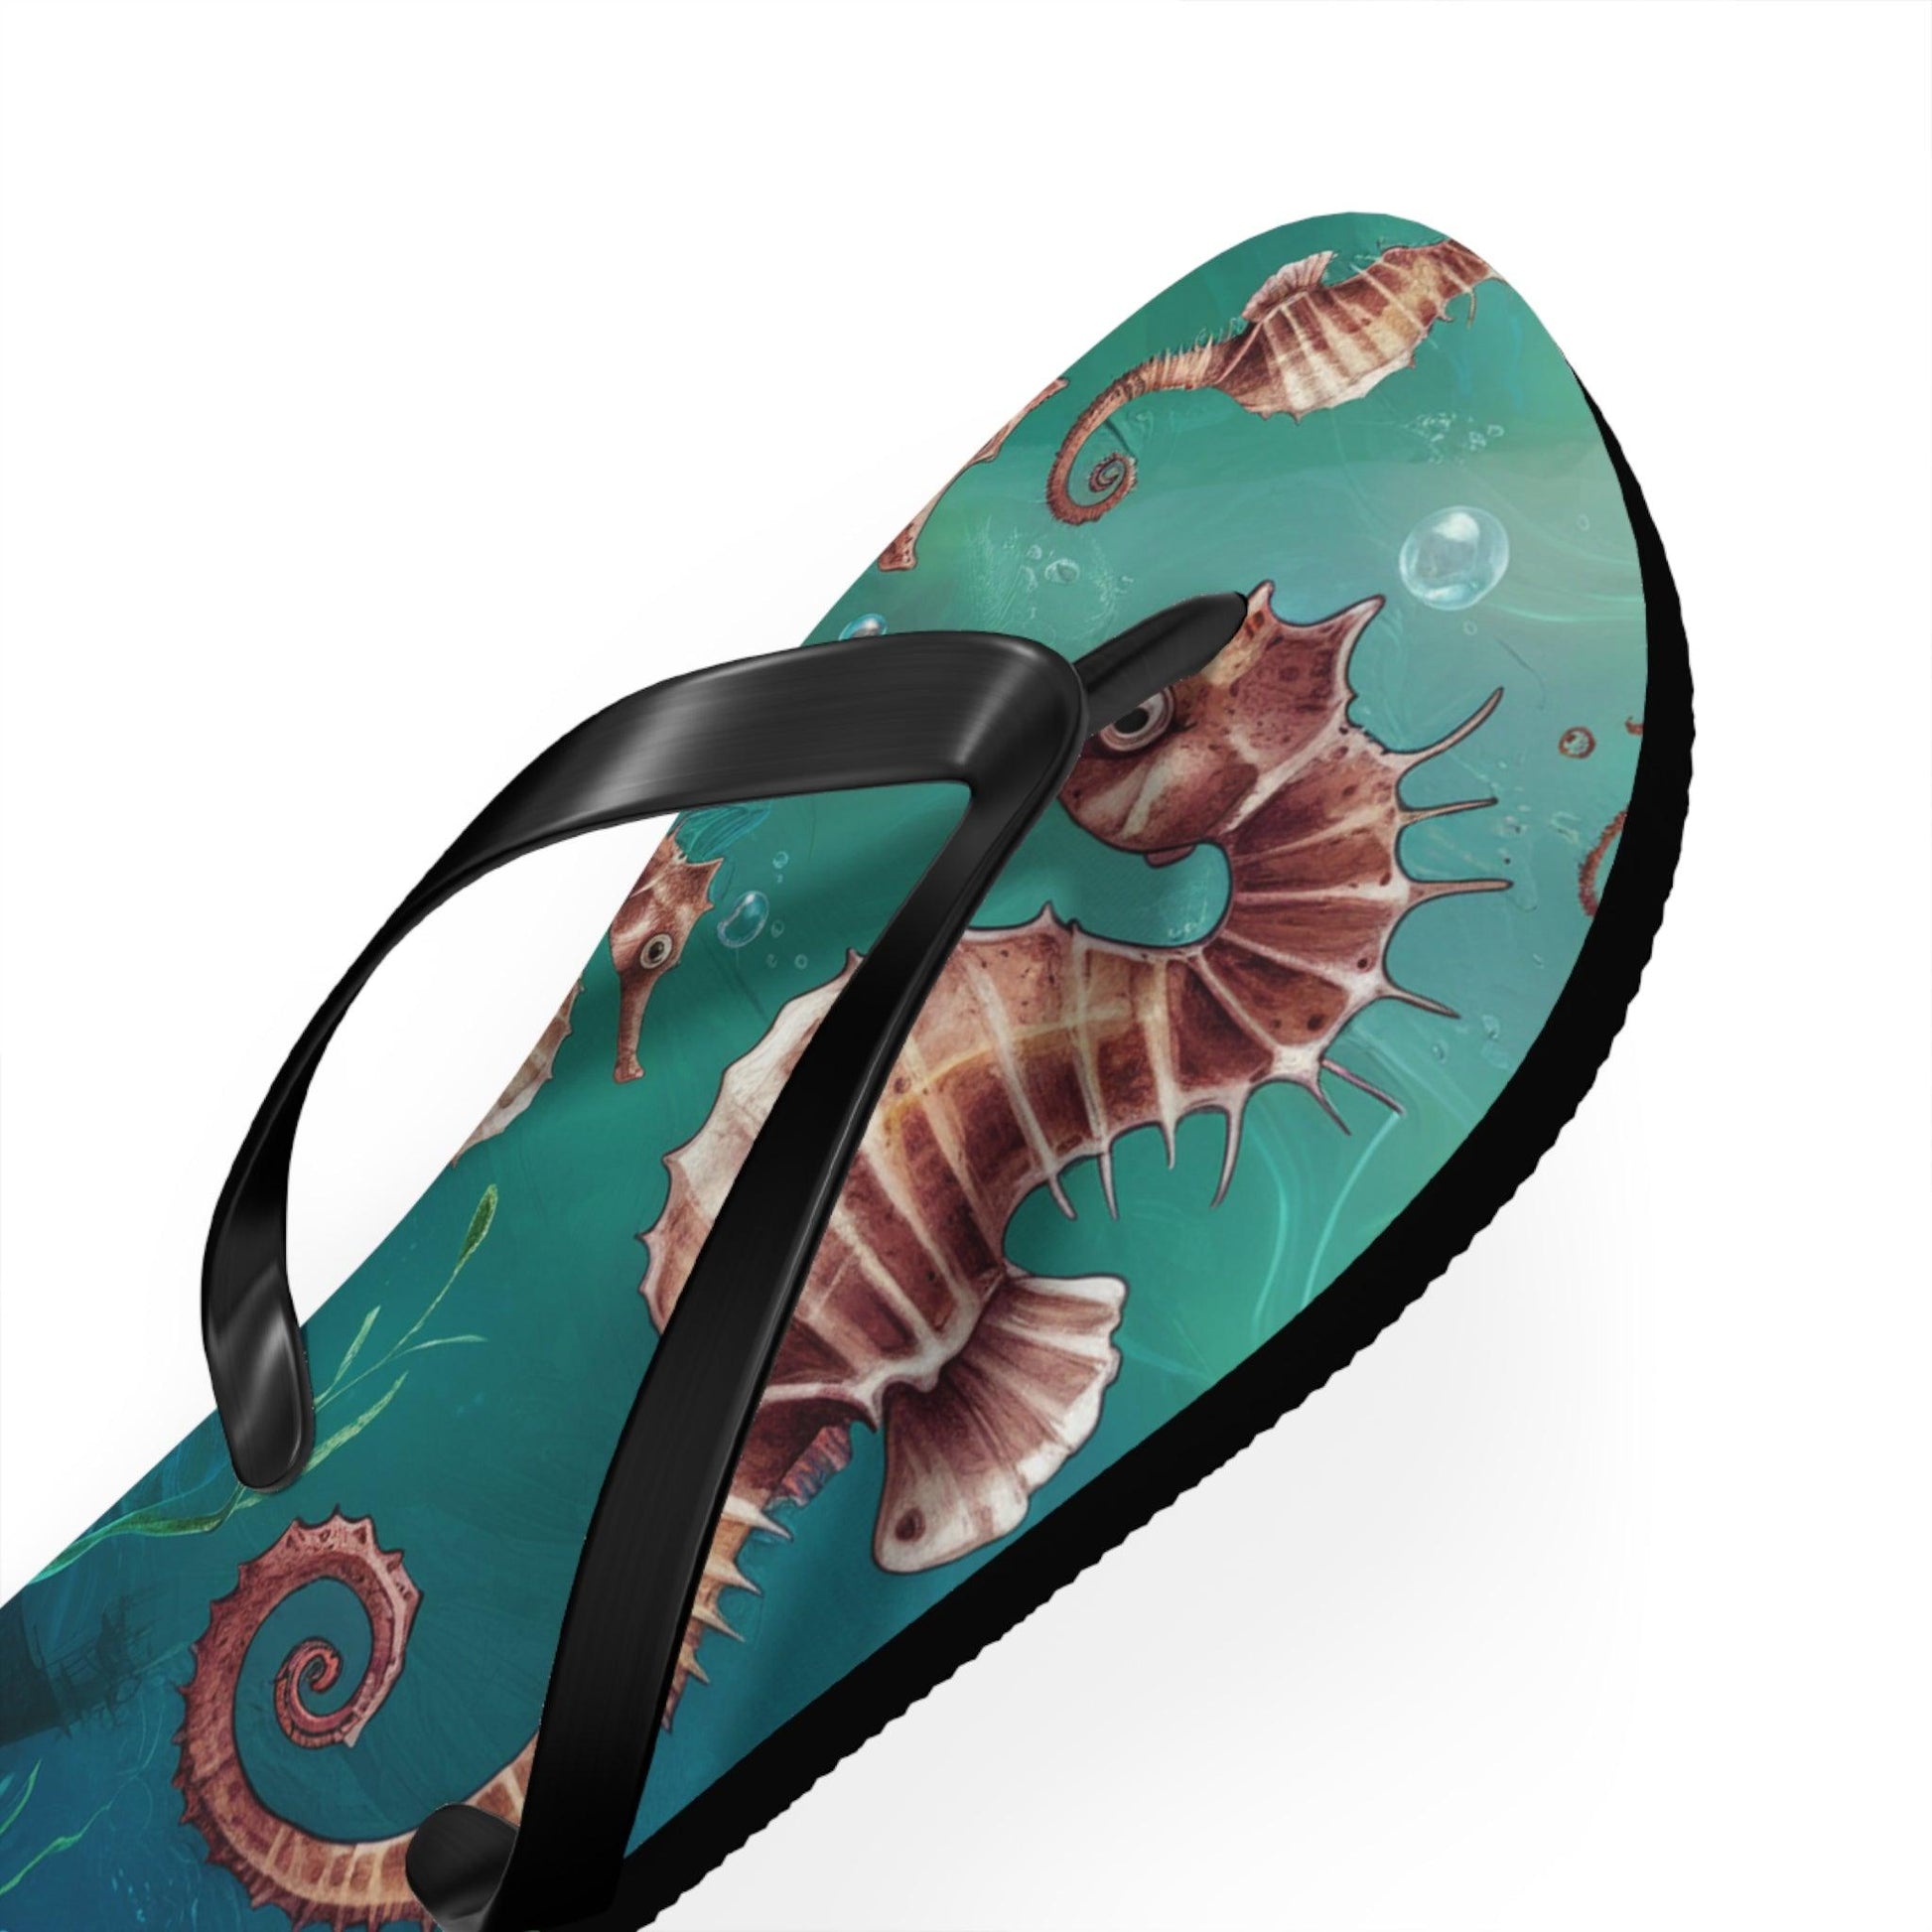 Seahorse Inspired Flip Flops, Express Your Beach Loving Self - Coastal Collections